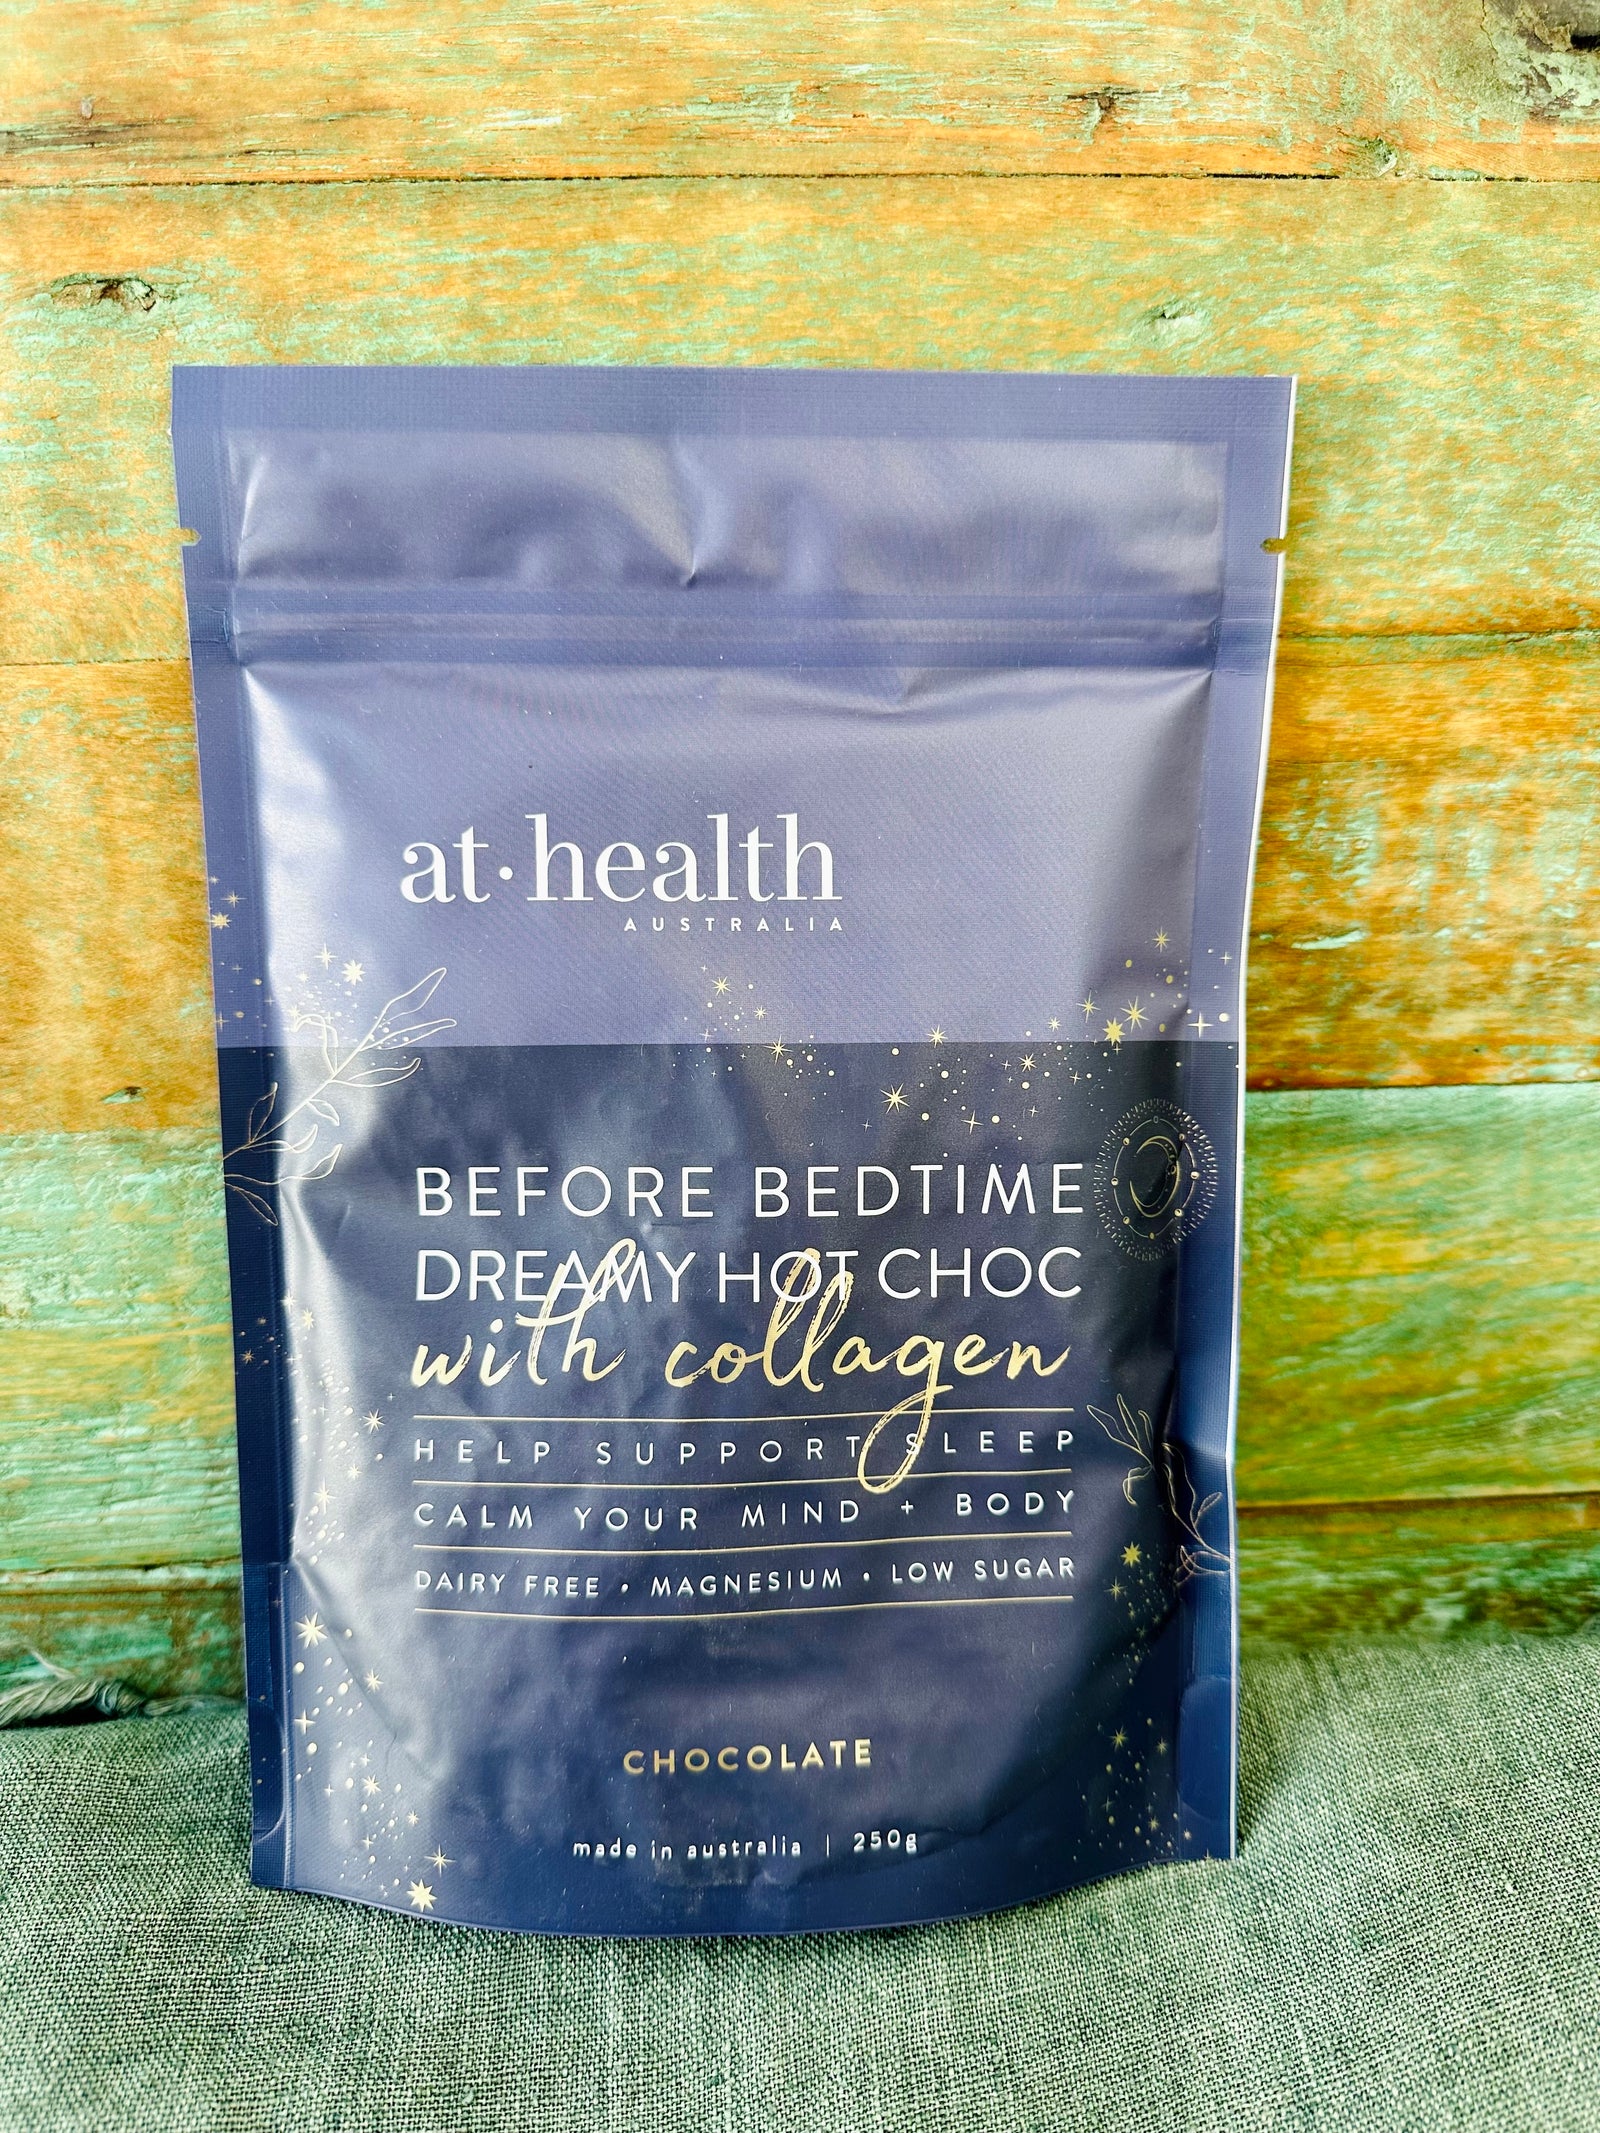 At Health - Before Bedtime Dreamy Hot Choc with Collagen